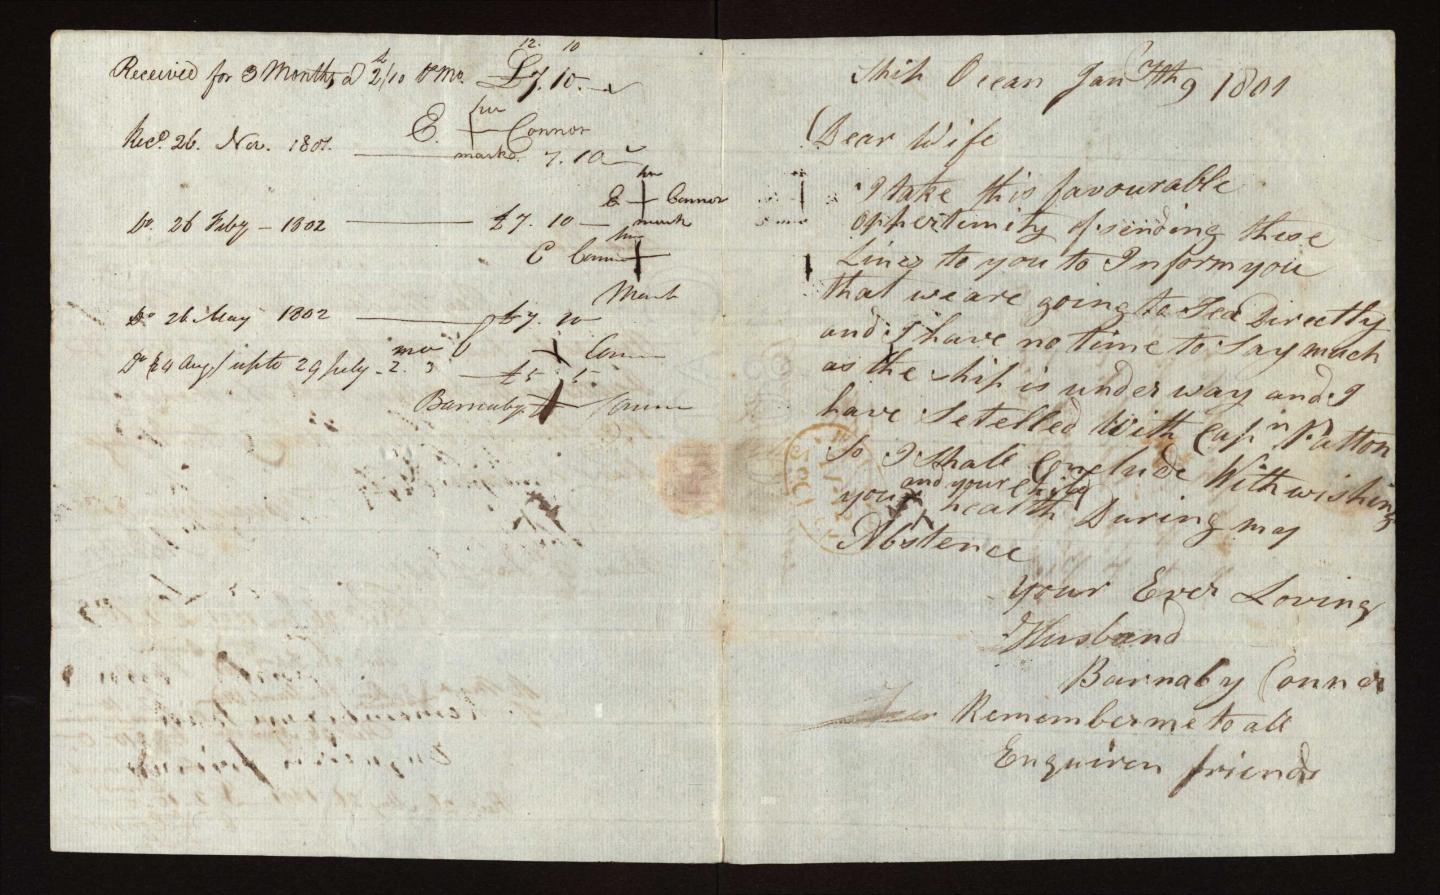 A letter to Elizabeth Conner from her husband, with a record of wages received while he was away at sea in 1801-1802 